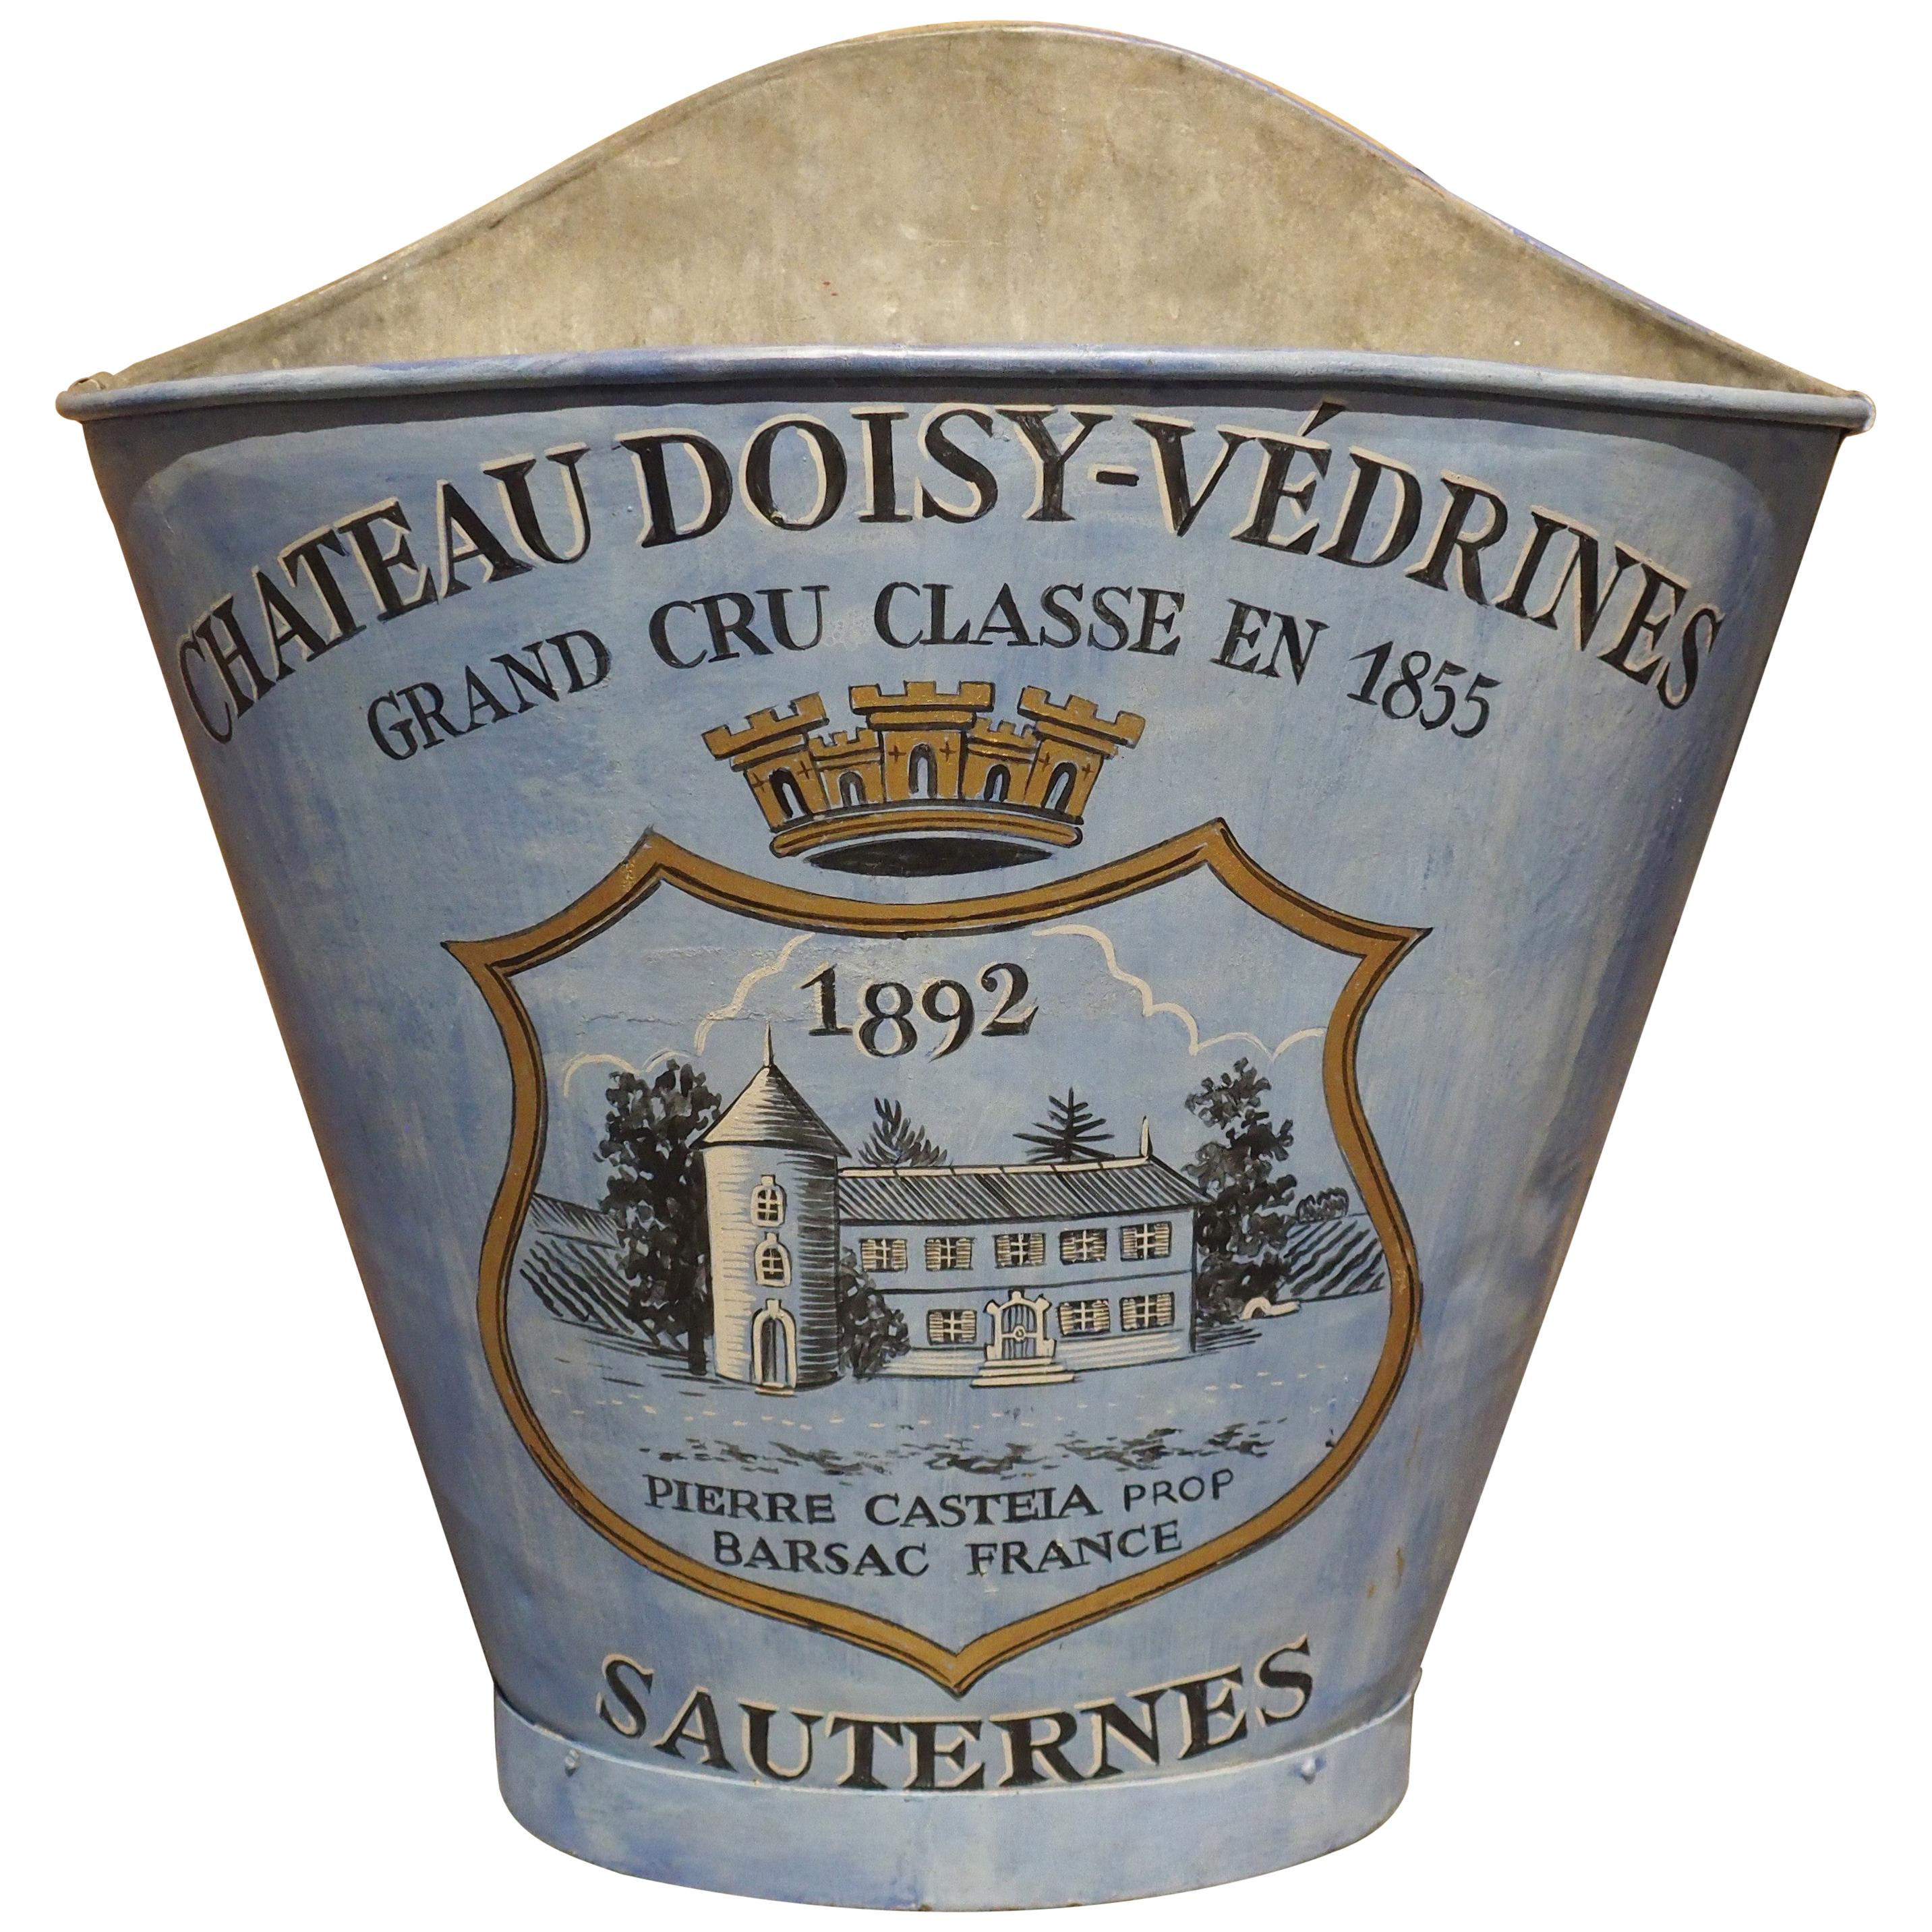 Painted French Blue Grape Hotte, “Chateau Doisy-Vedrines Sauternes”